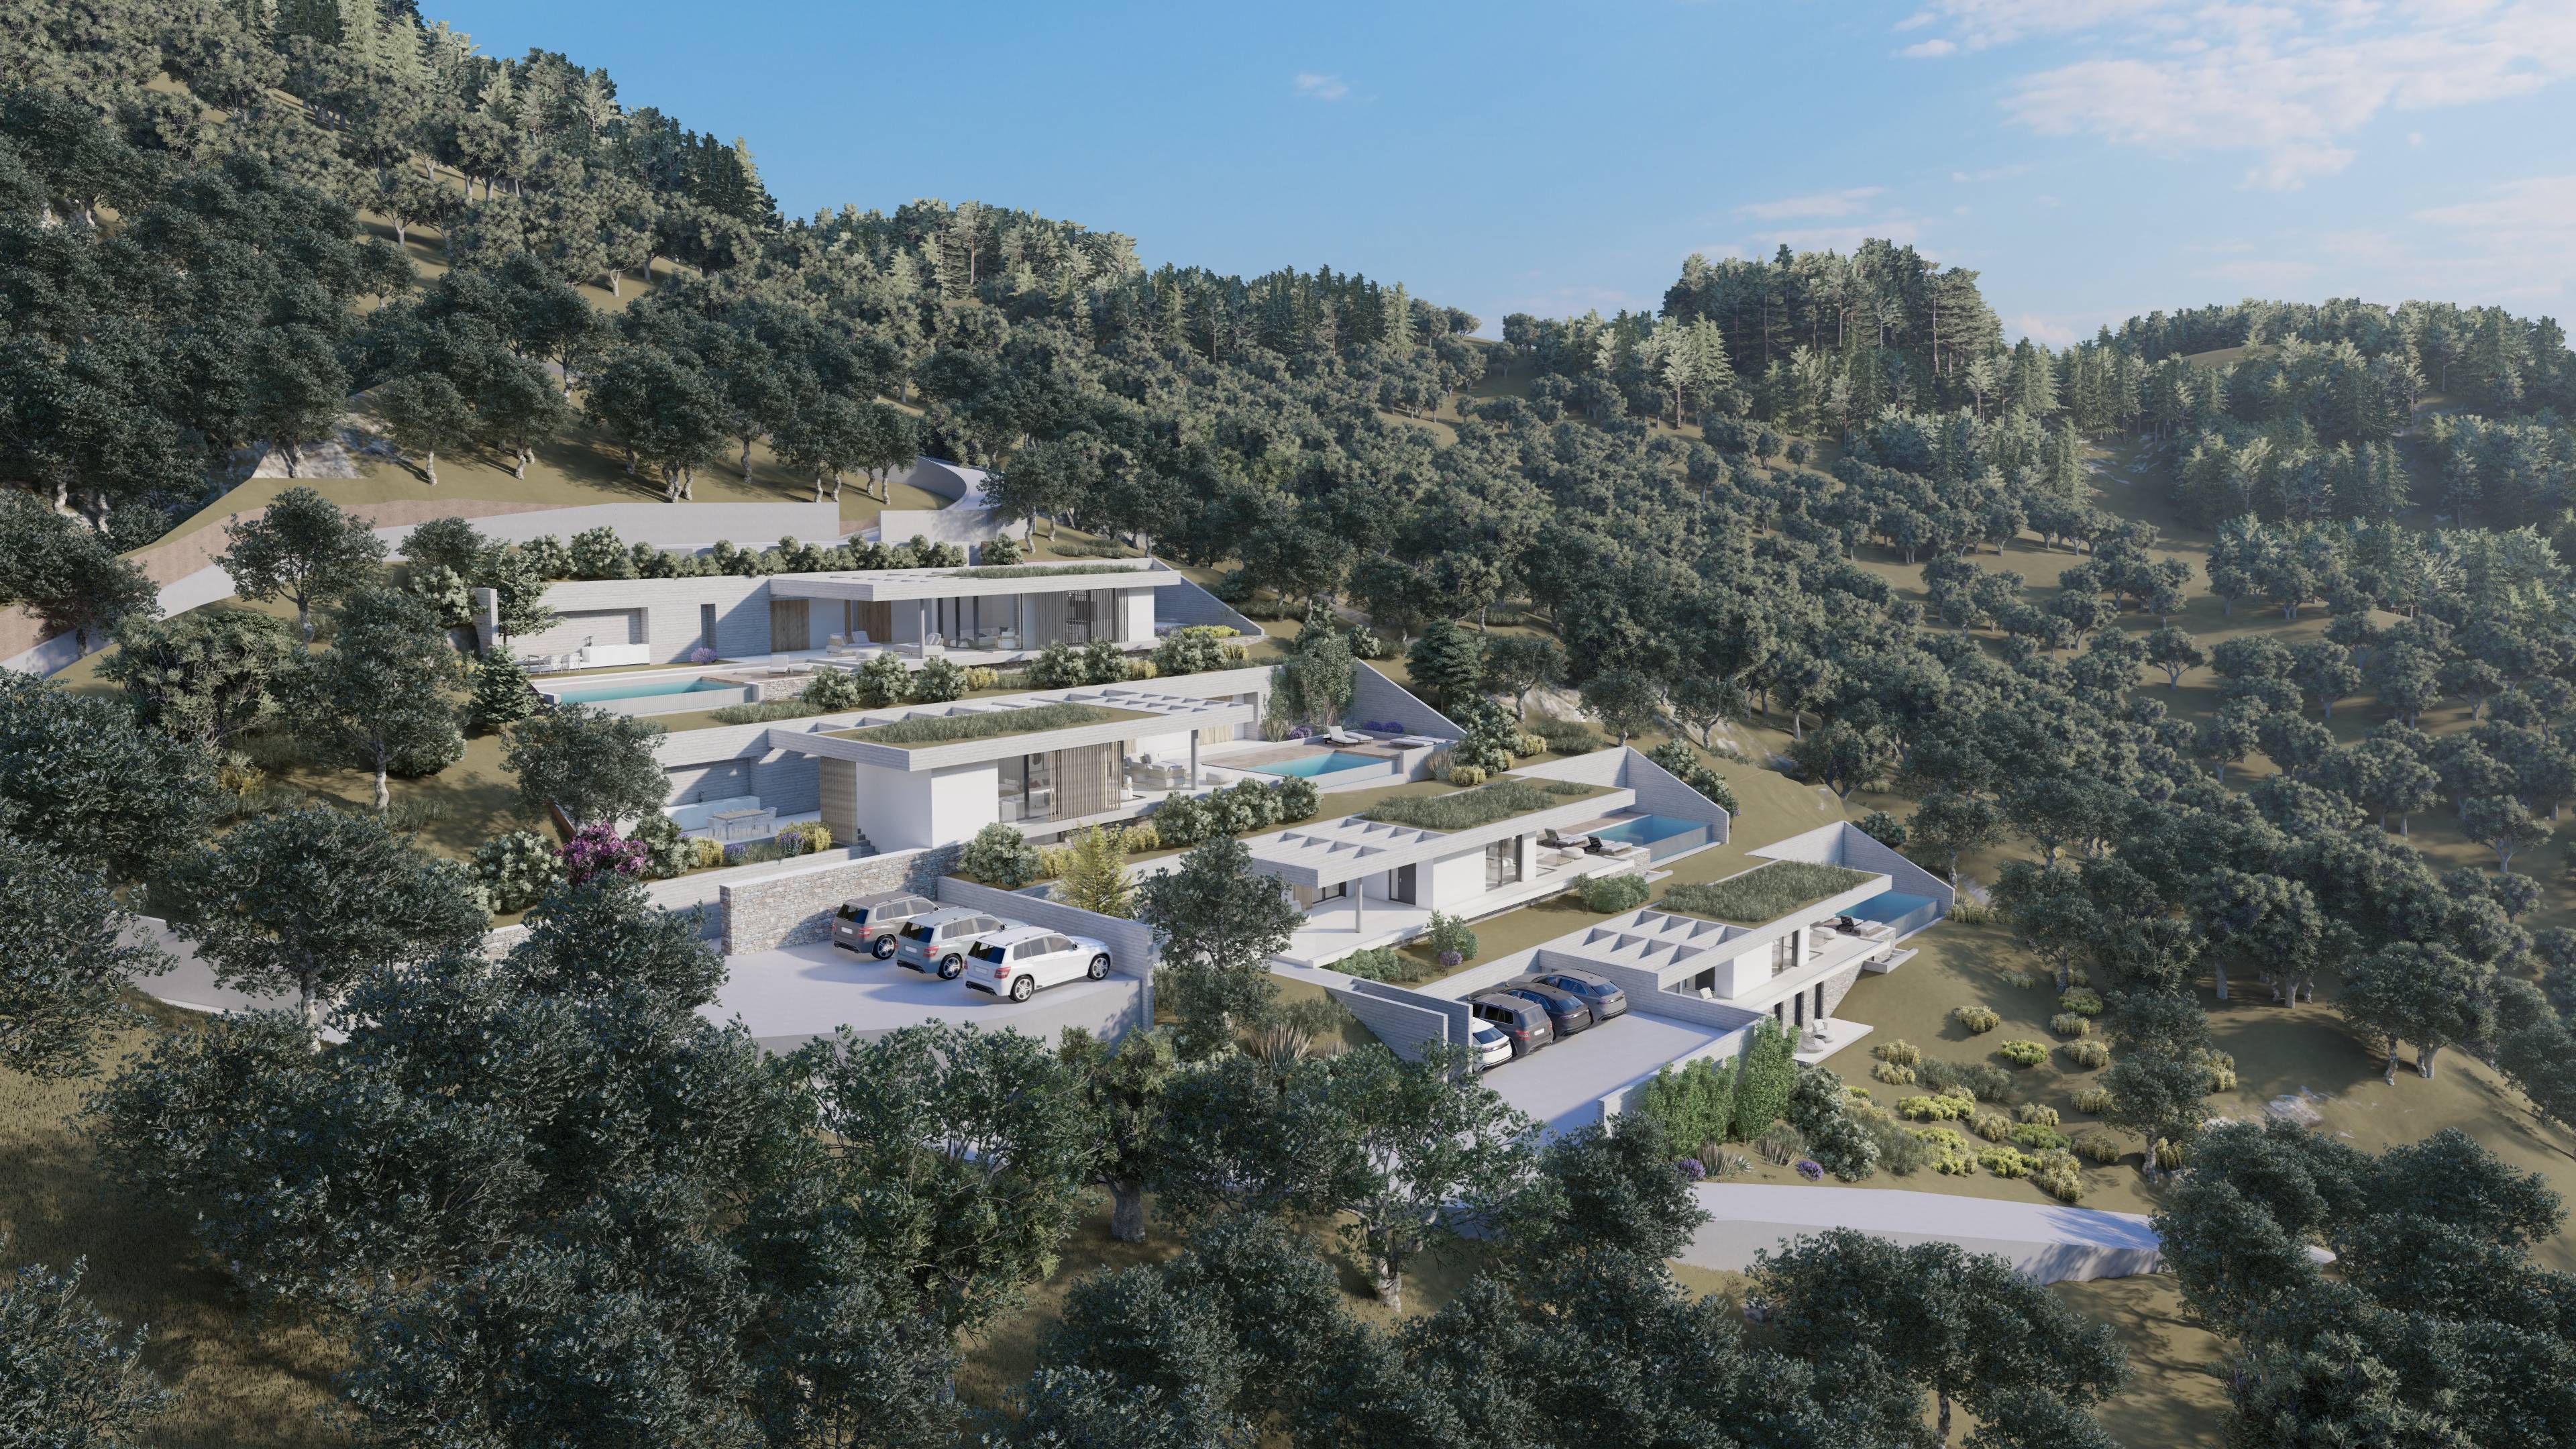 LUXURY MAGIC FOREST RETREAT VILLA IV AMID SKIATHOS’ PRESERVED OLIVE GROVES: PRIME INVESTMENT OPPORTUNITY